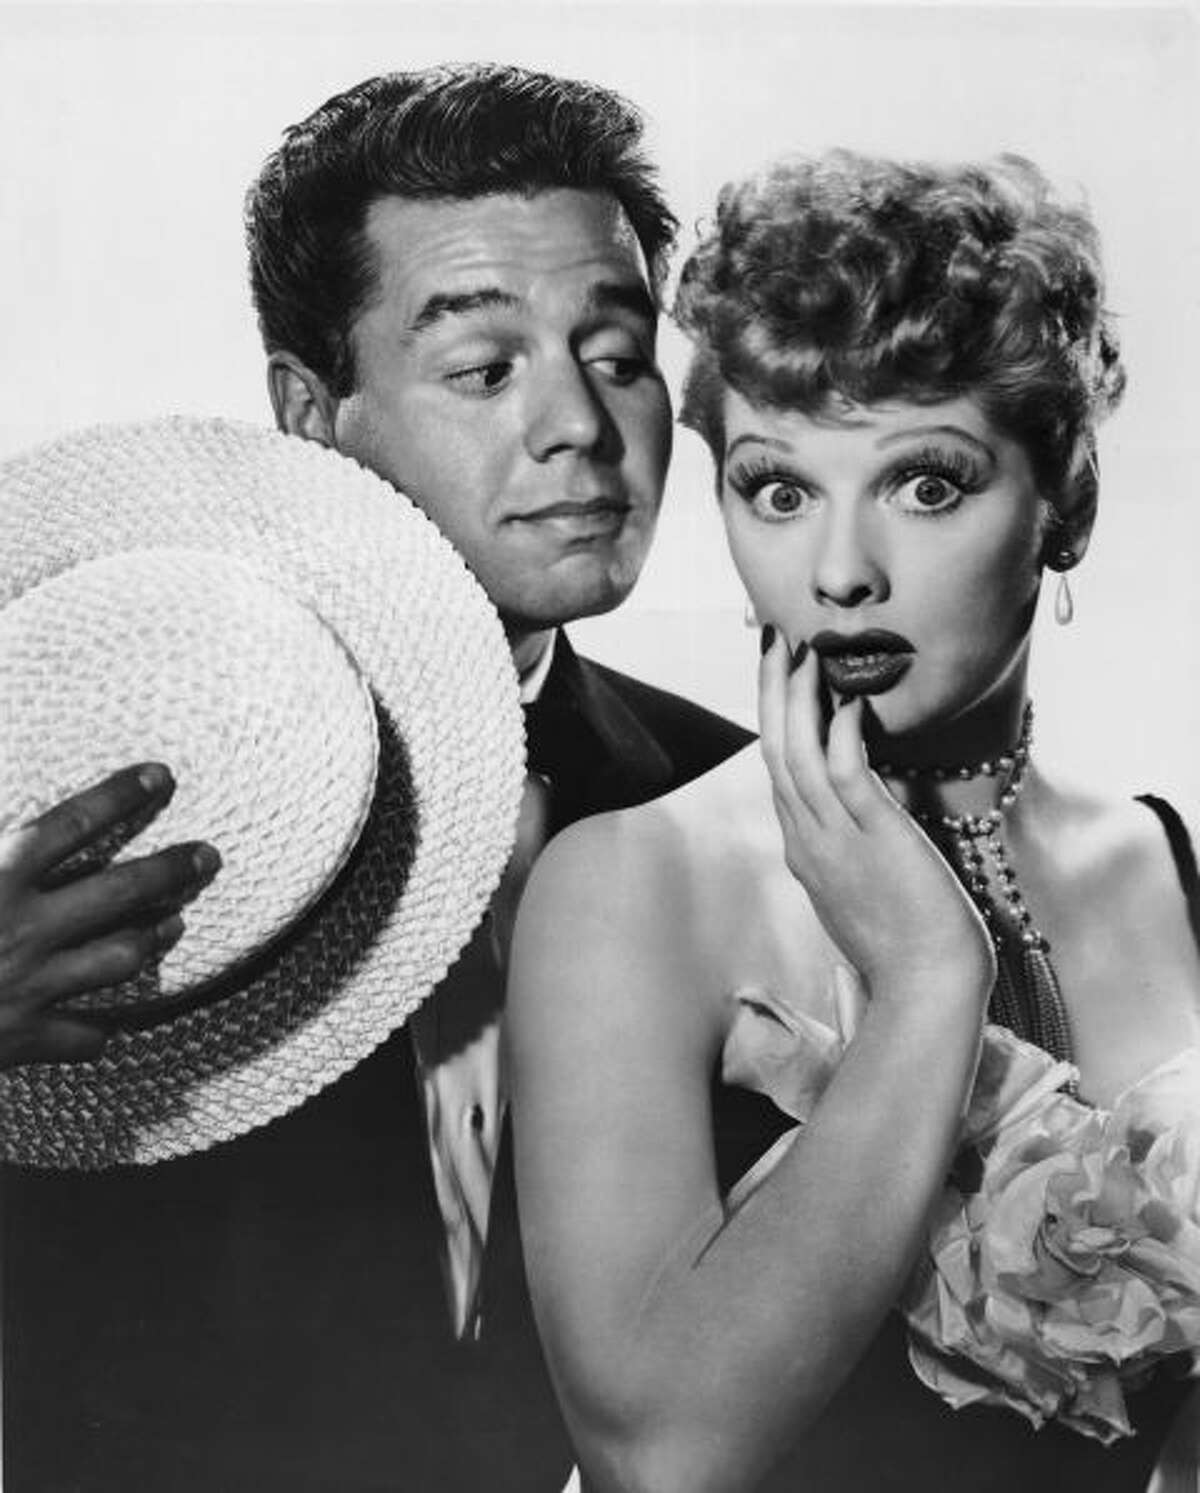 Popularity During its six seasons, "I Love Lucy" was the most popular TV show in American for four of those seasons.